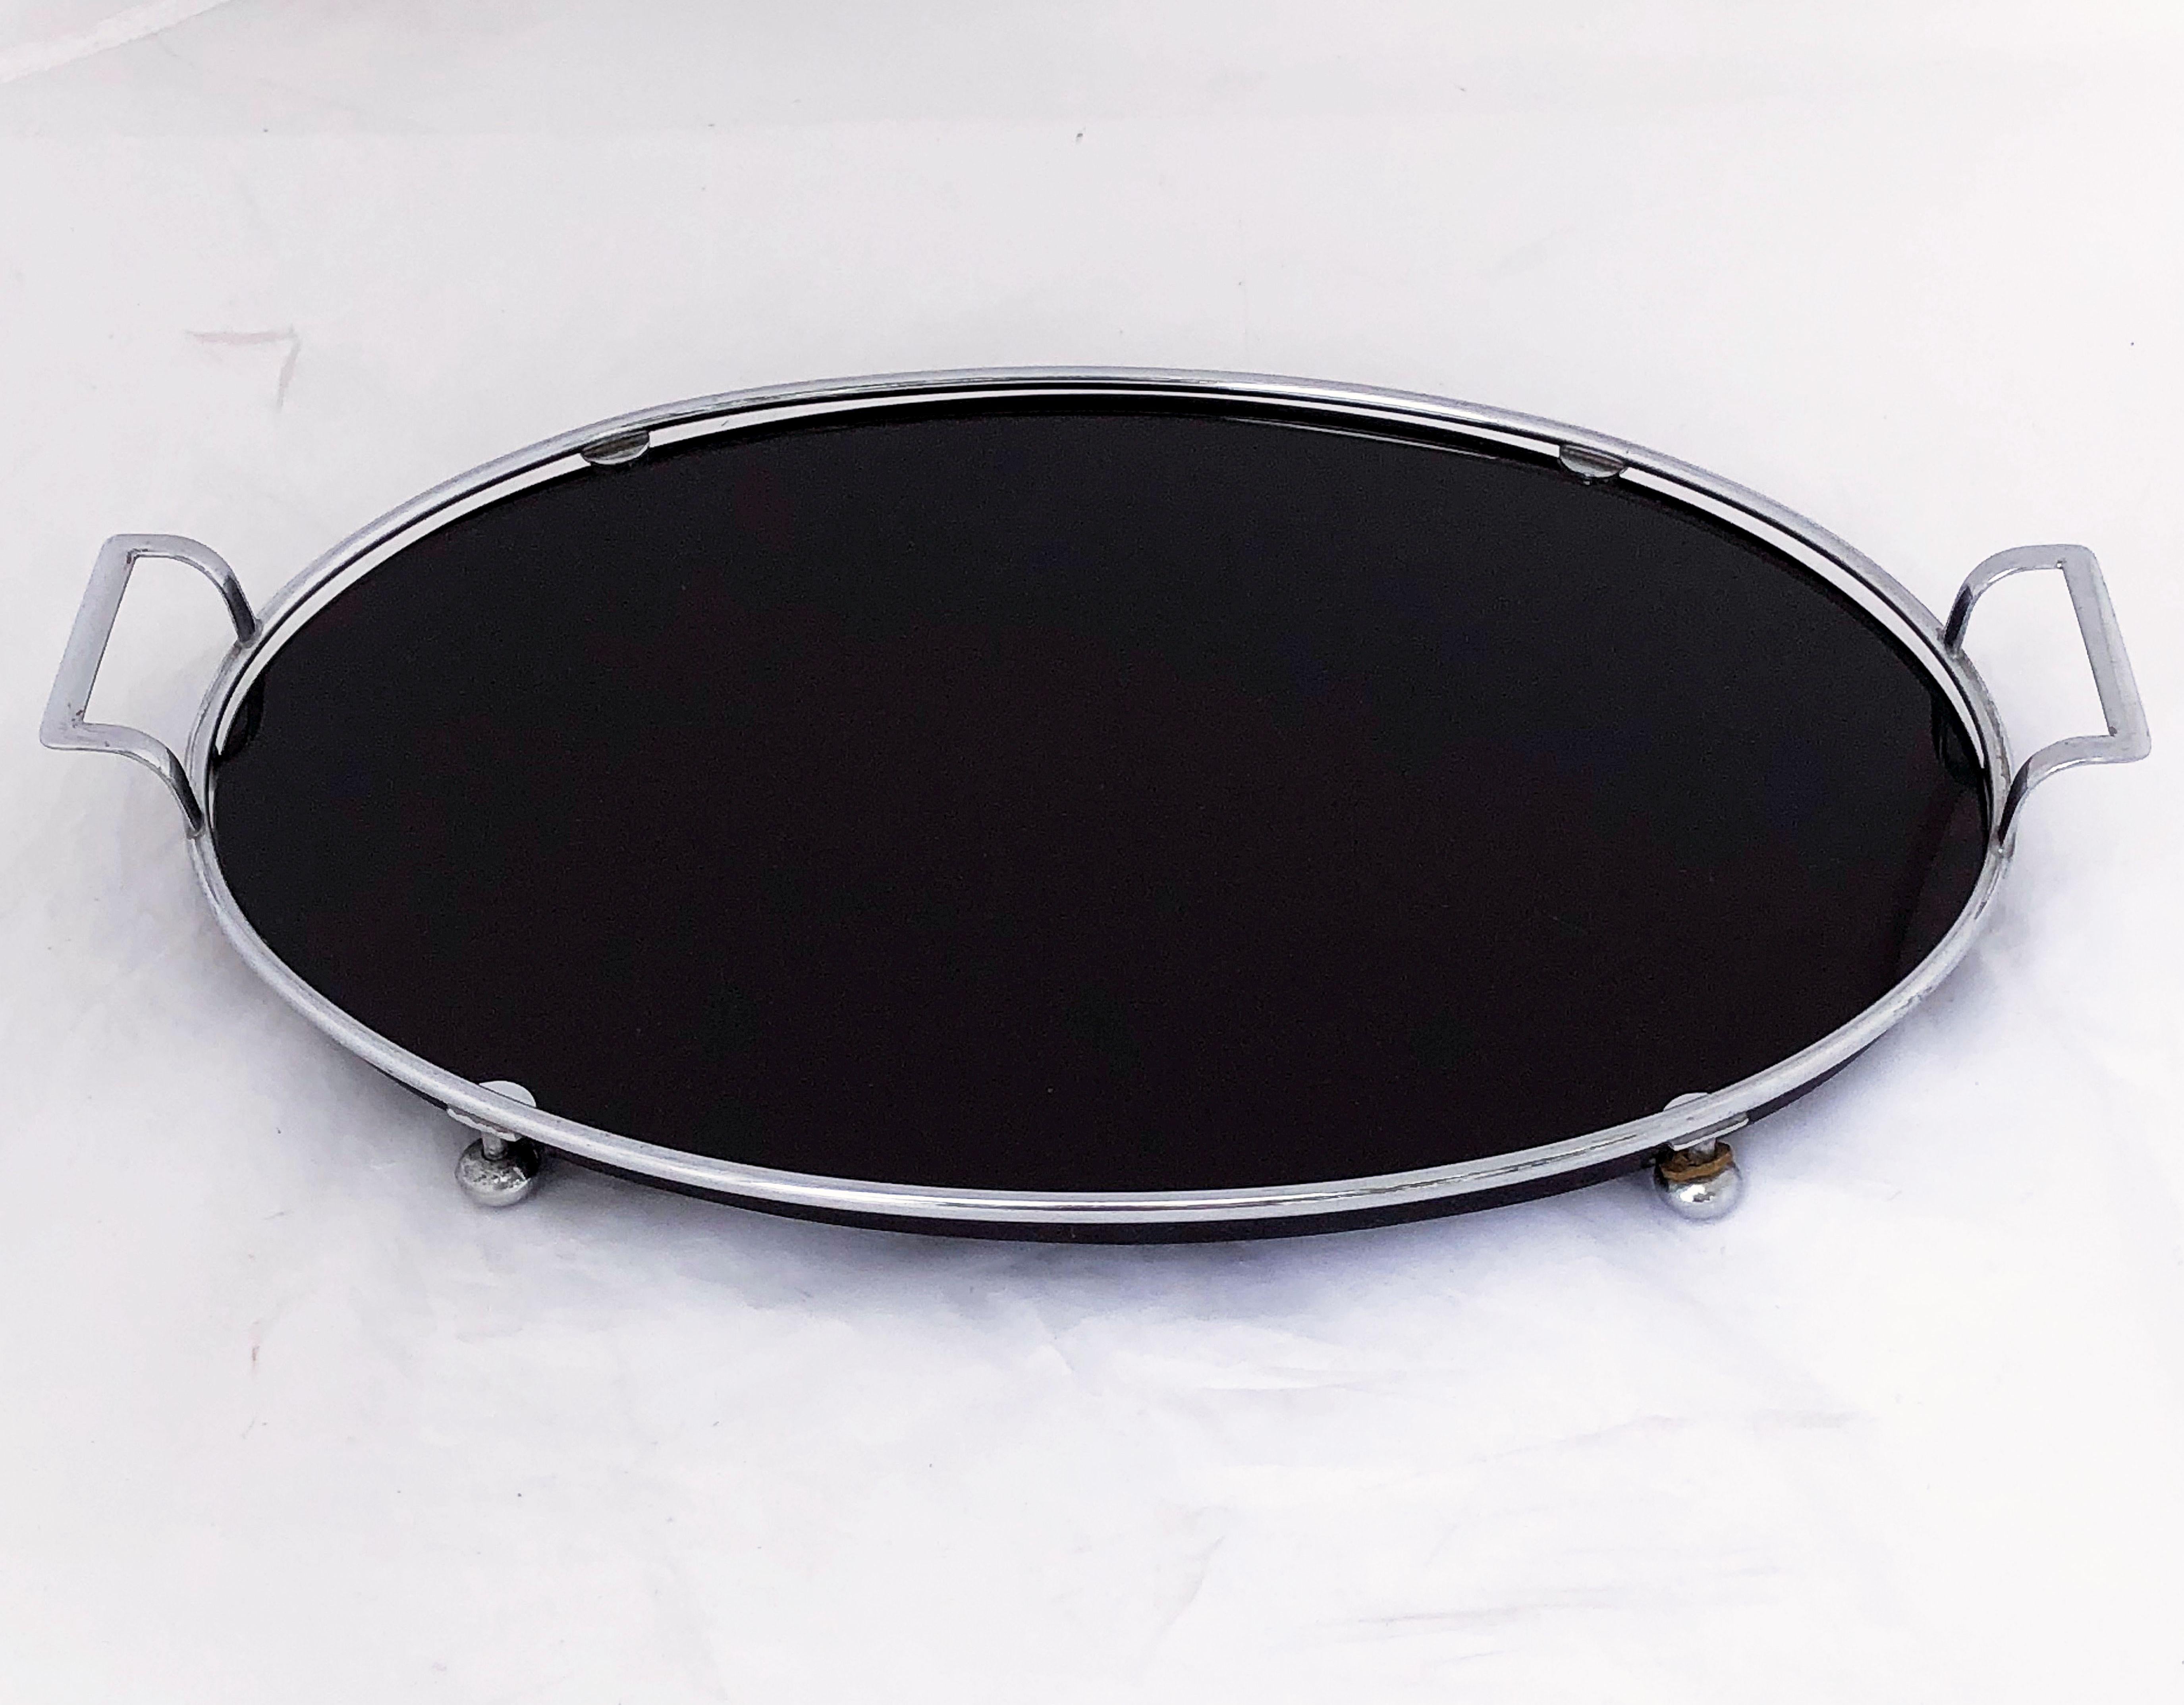 A fine English oval serving tray from the Art Deco period, featuring an oval black or ebony glass mounted to a stylish chrome metal frame with opposing handles and round feet (with two original rubber washers).